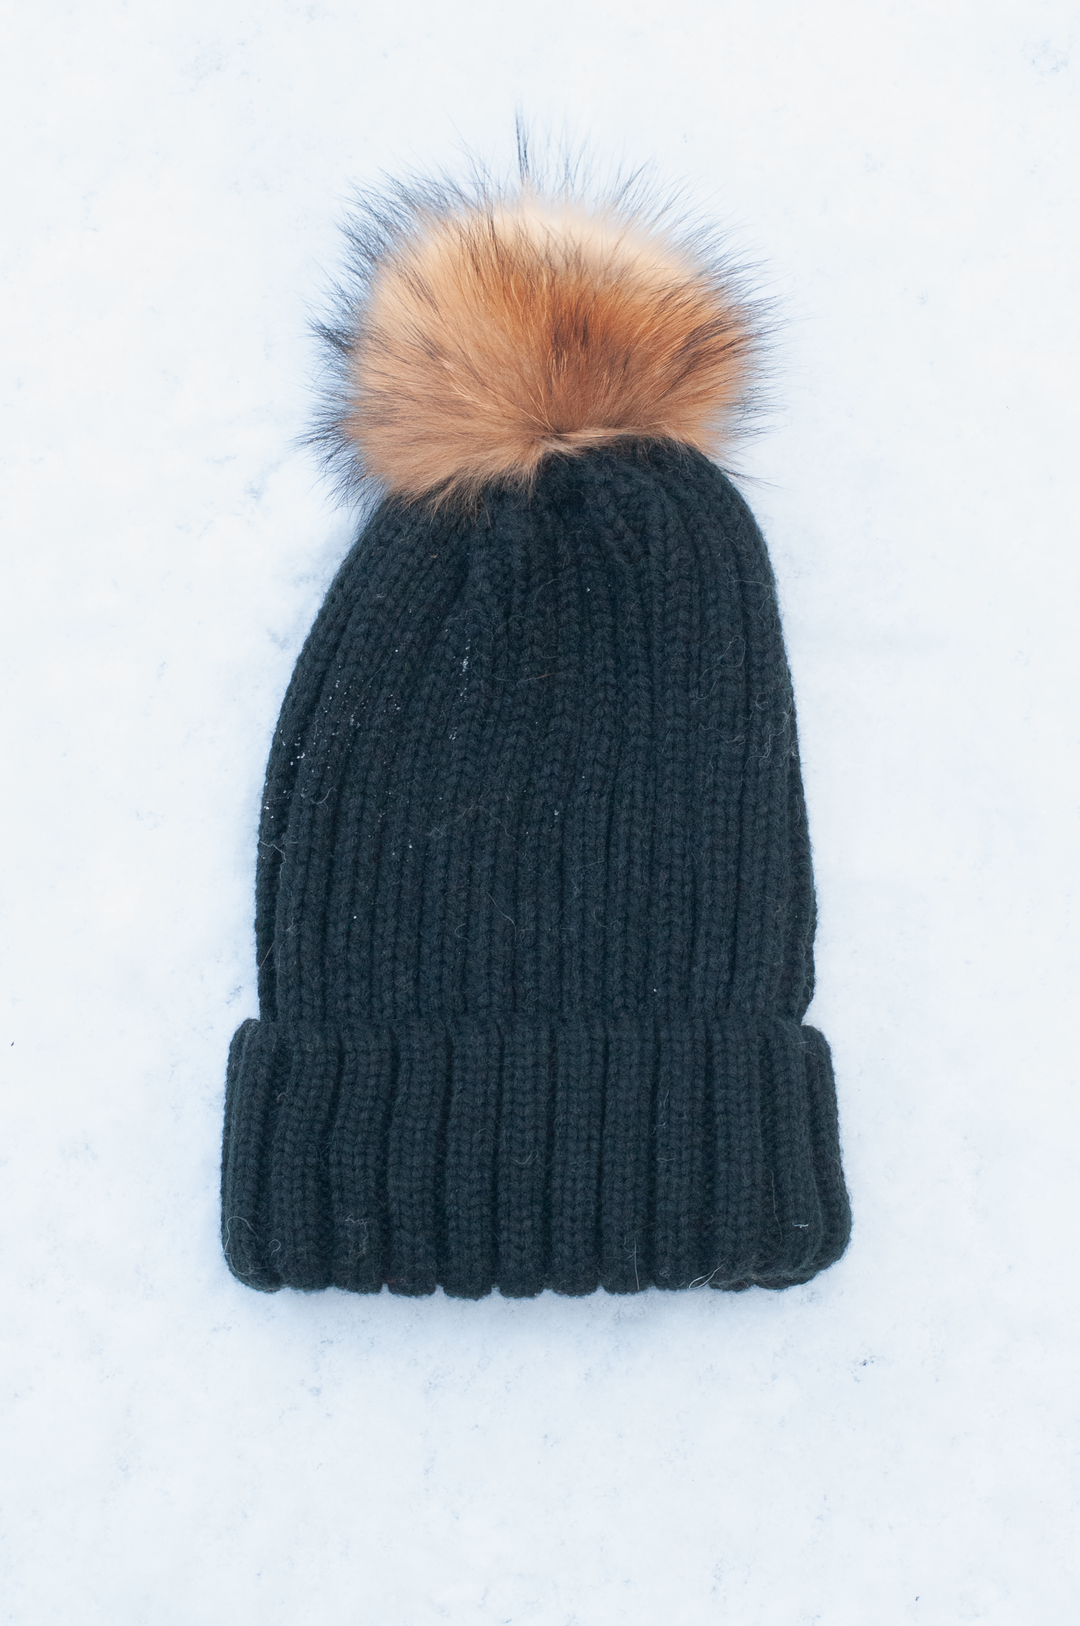 Beanie Hat - Knitted Acrylic - Black